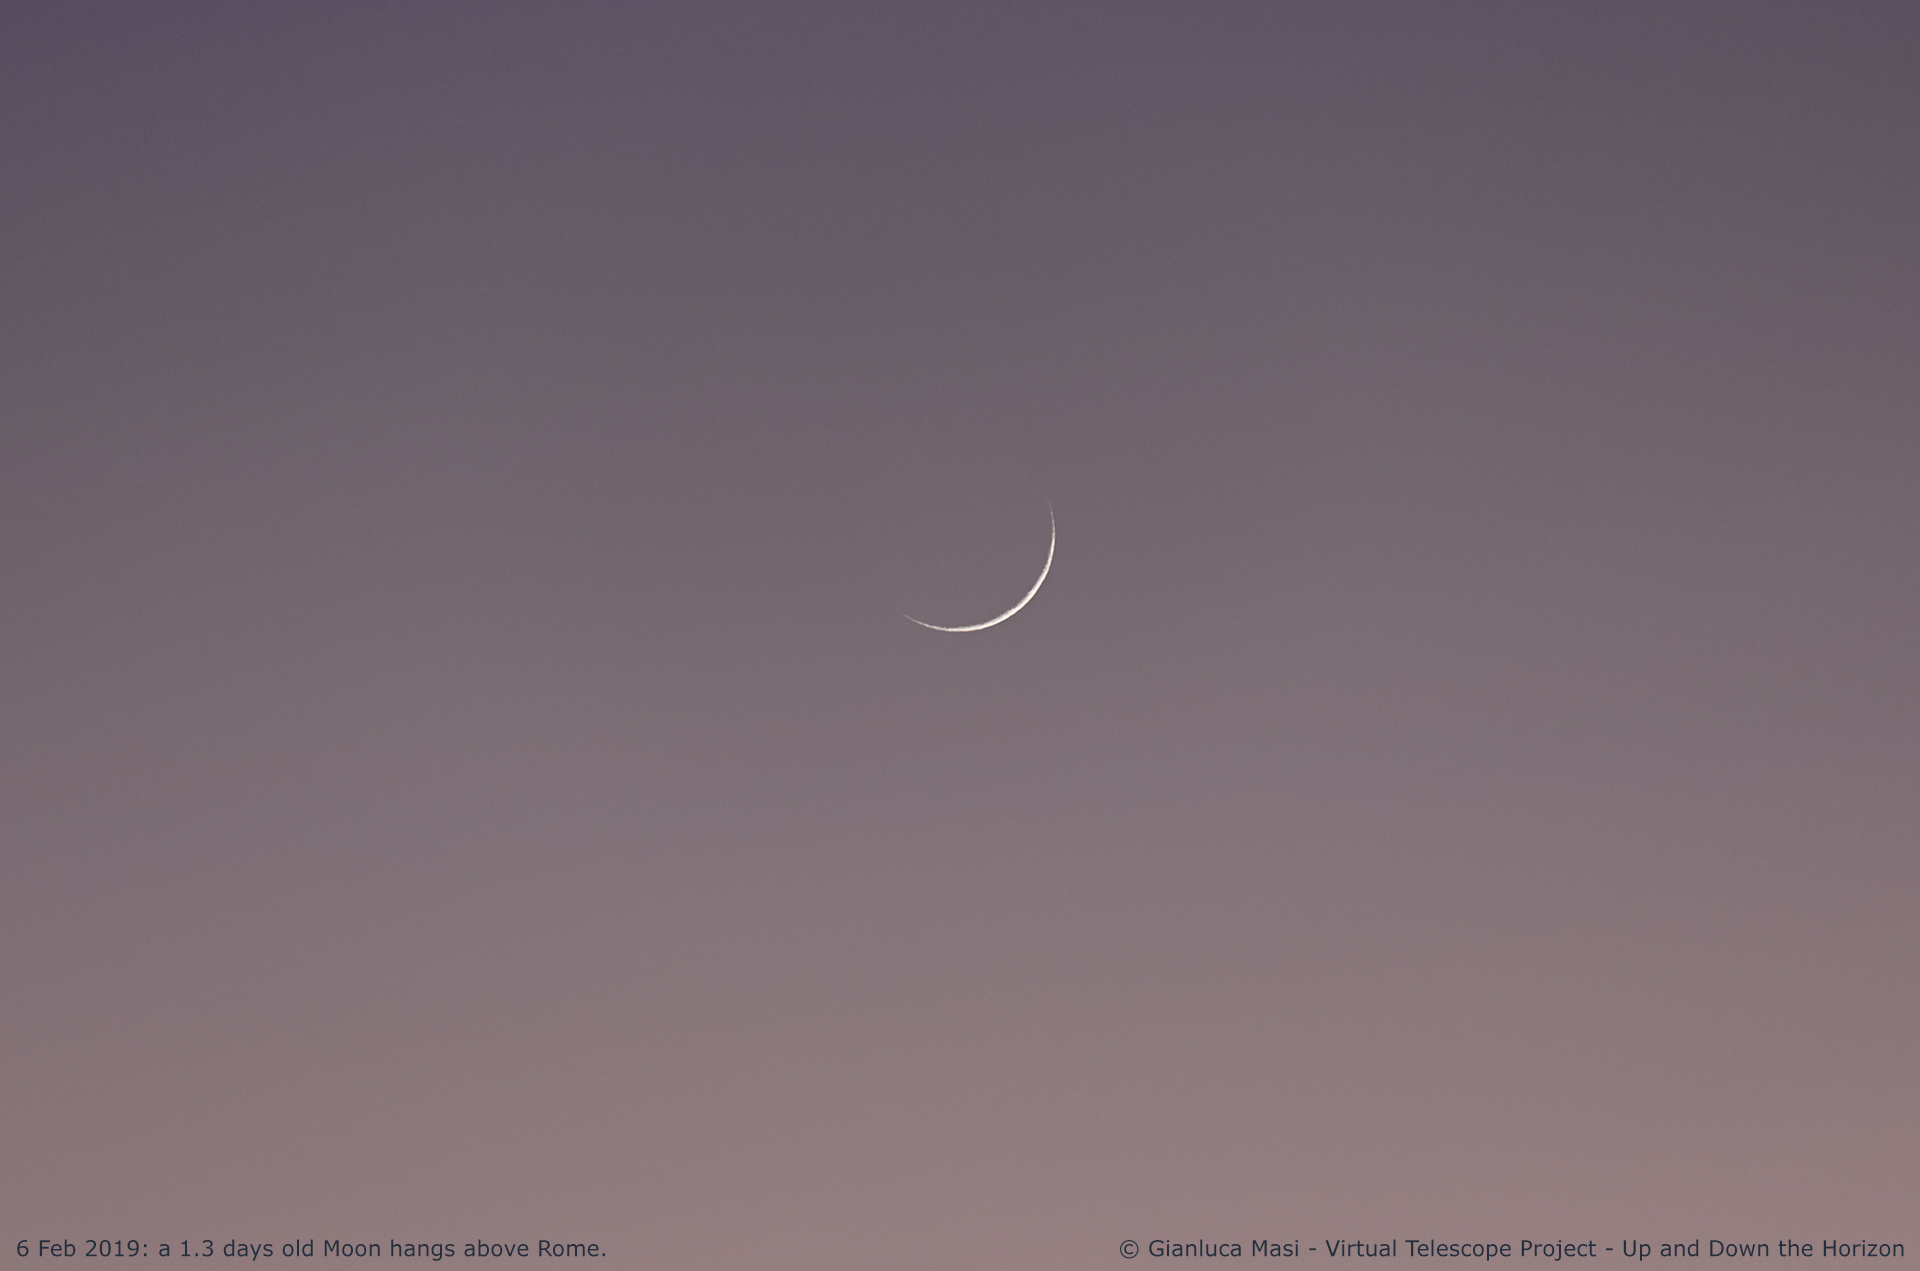 A very young Moon shines in the sky soon after sunset - Rome, 6 Feb. 2019